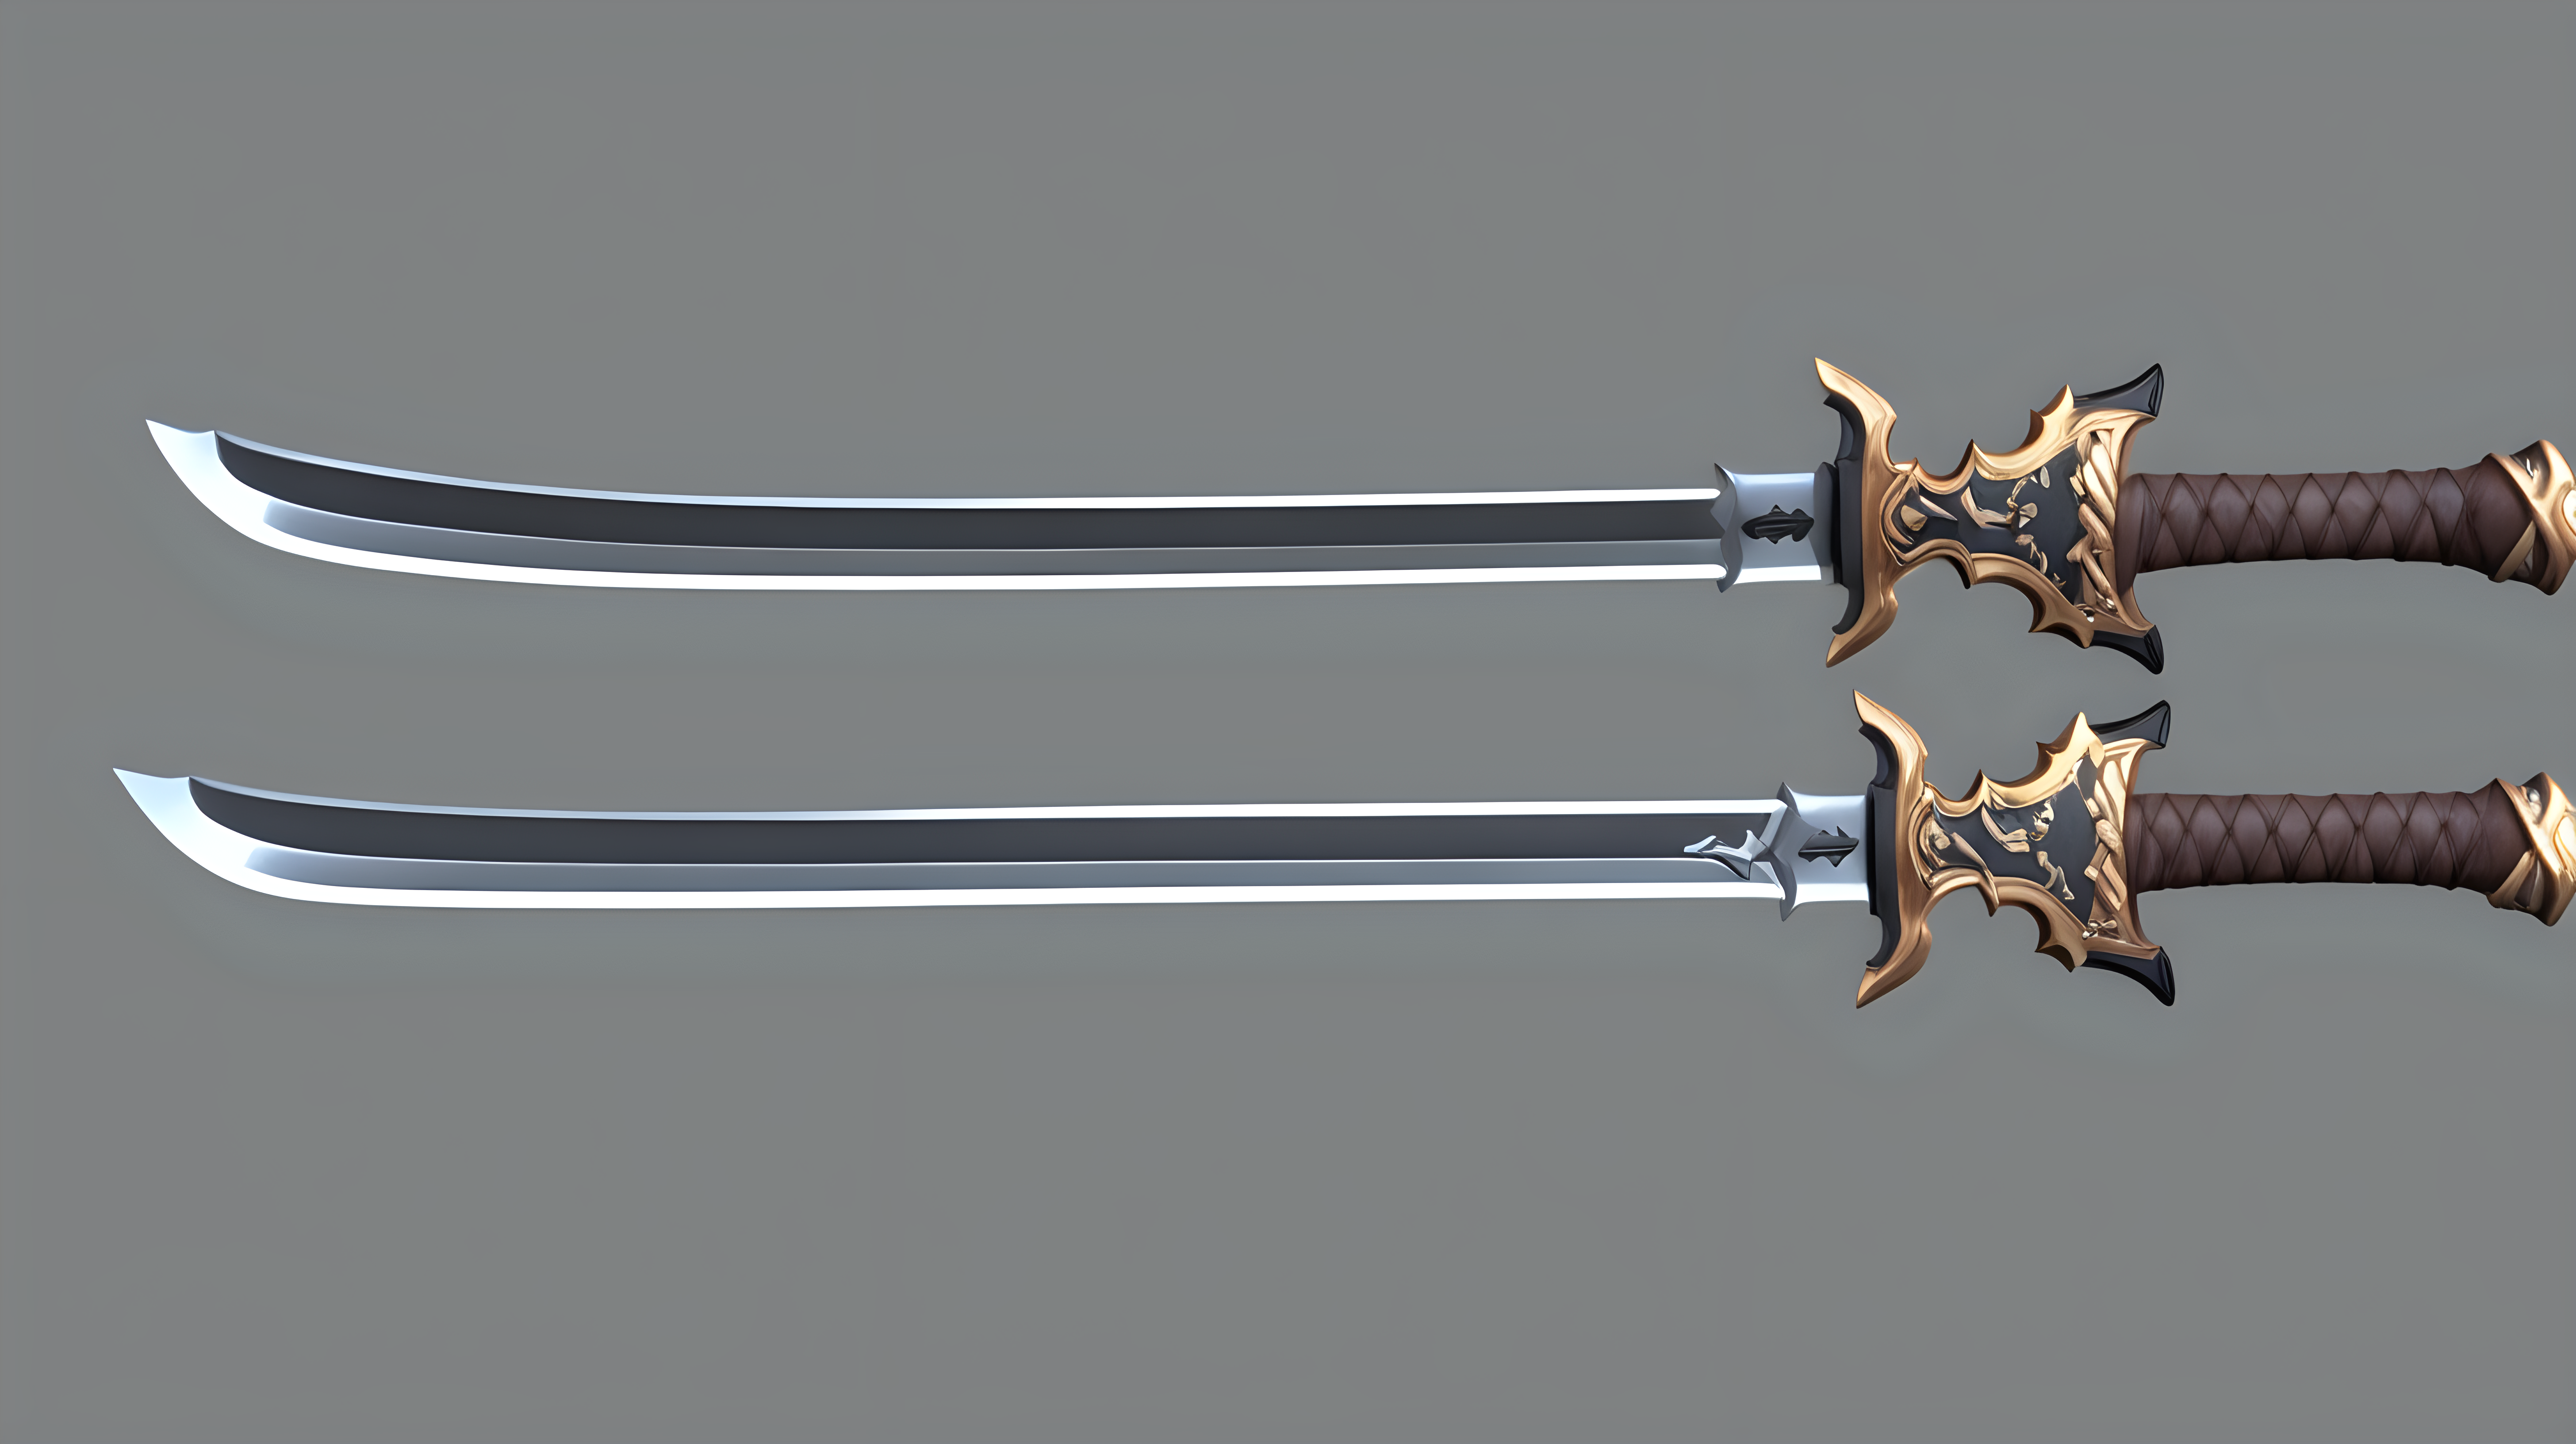 Model for a simple sword for a 3D